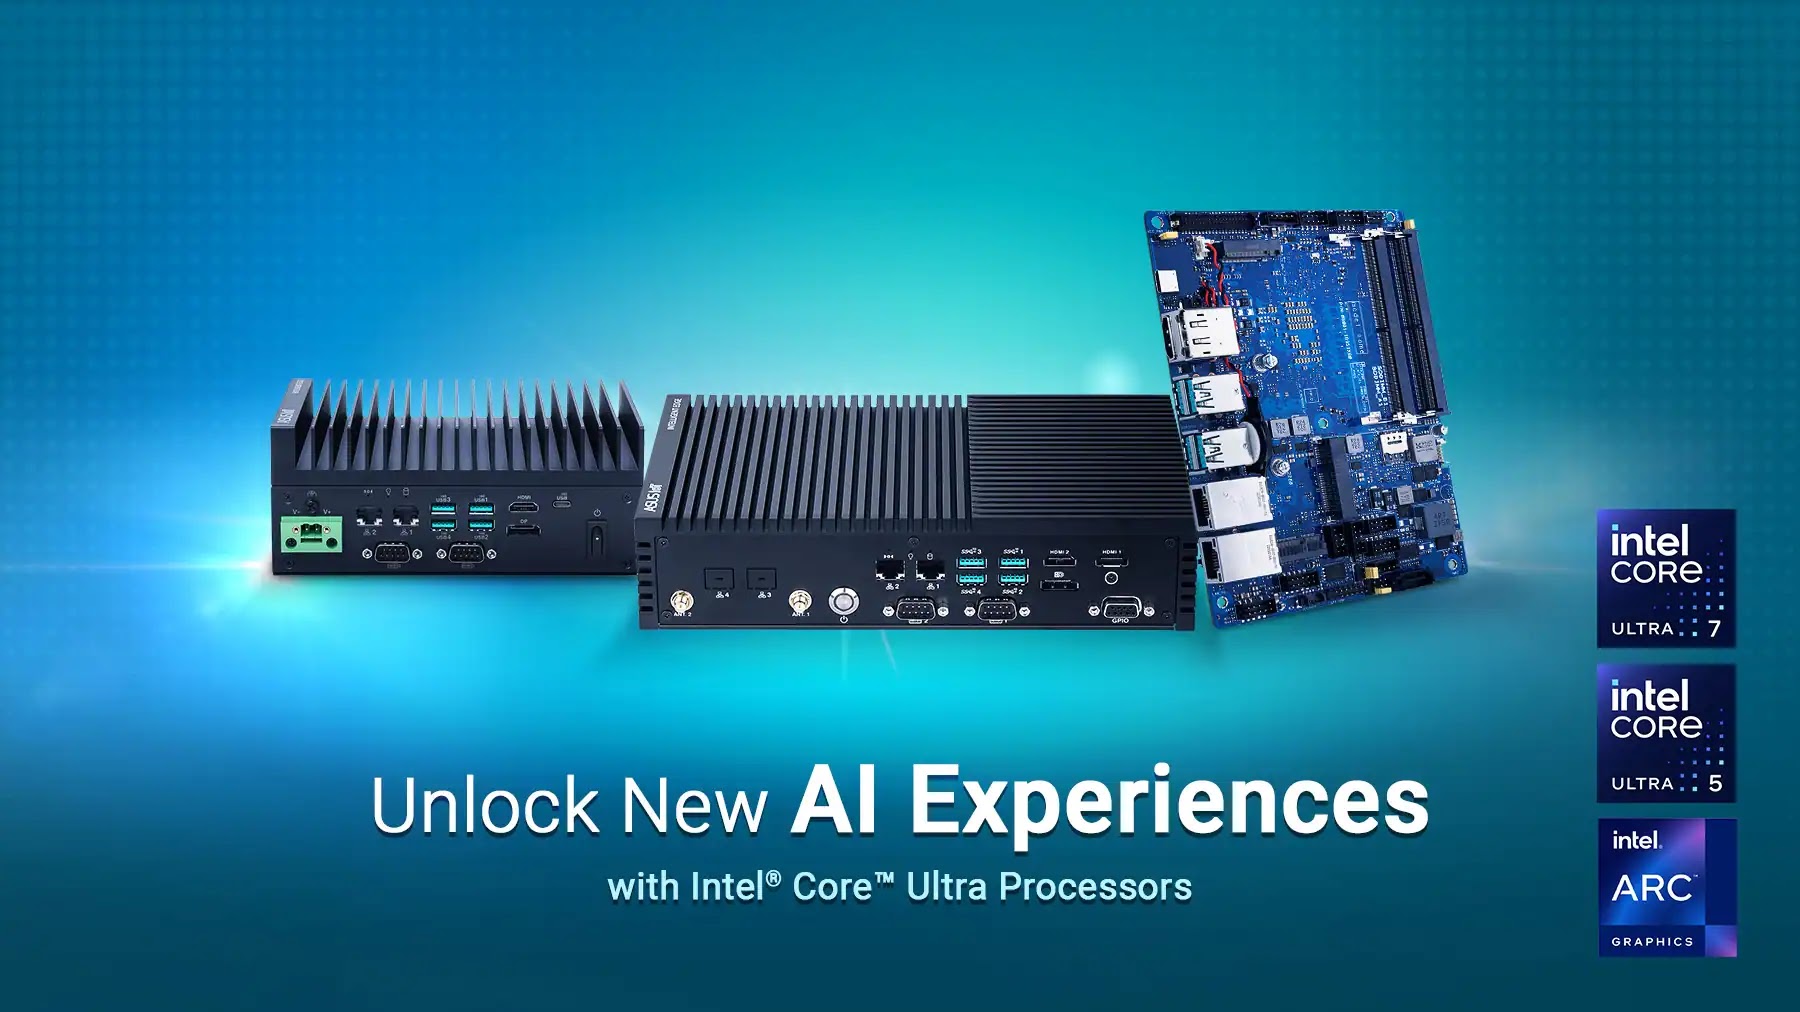 ASUS IoT Powered by Intel Core Ultra Processors